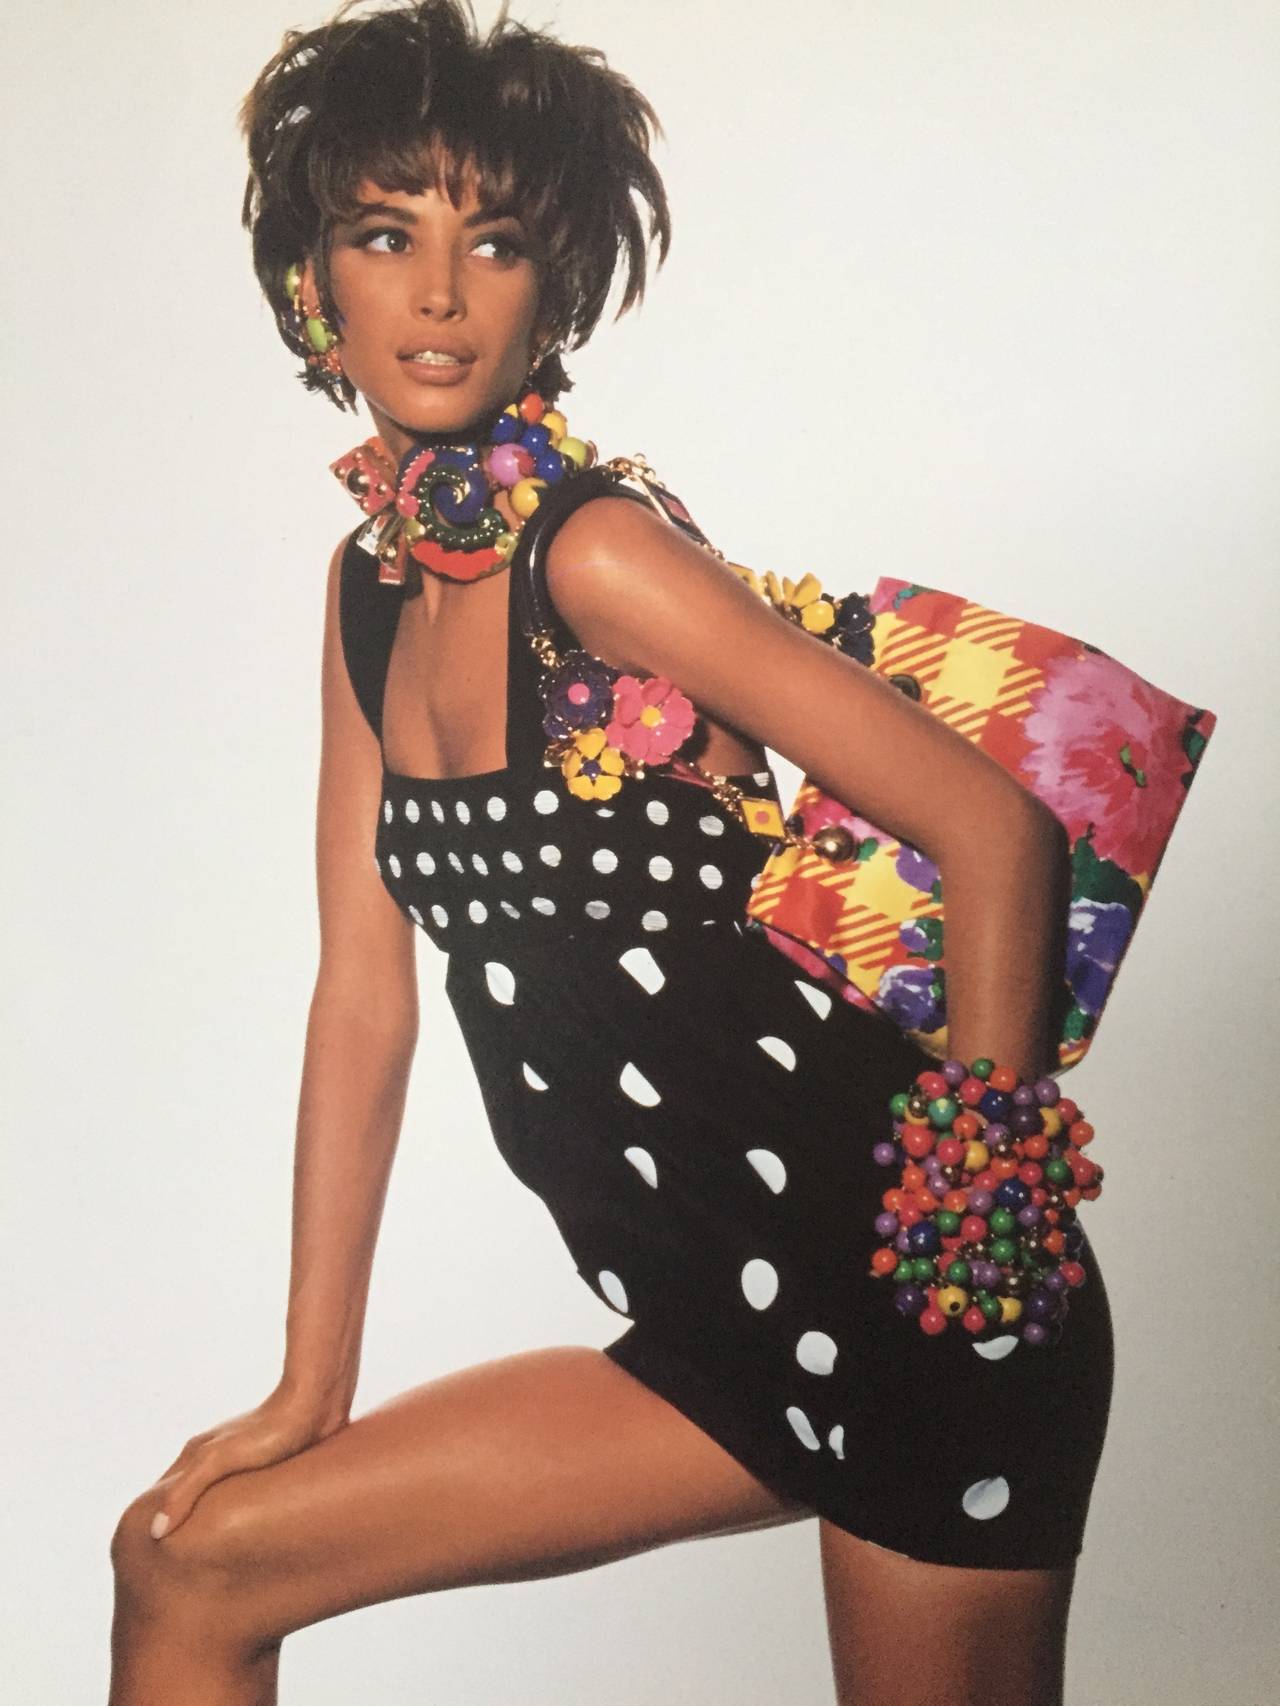 Iconic Gianni Versace Polka Dot Babydoll Dress Spring 1991 In Excellent Condition For Sale In W1, GB